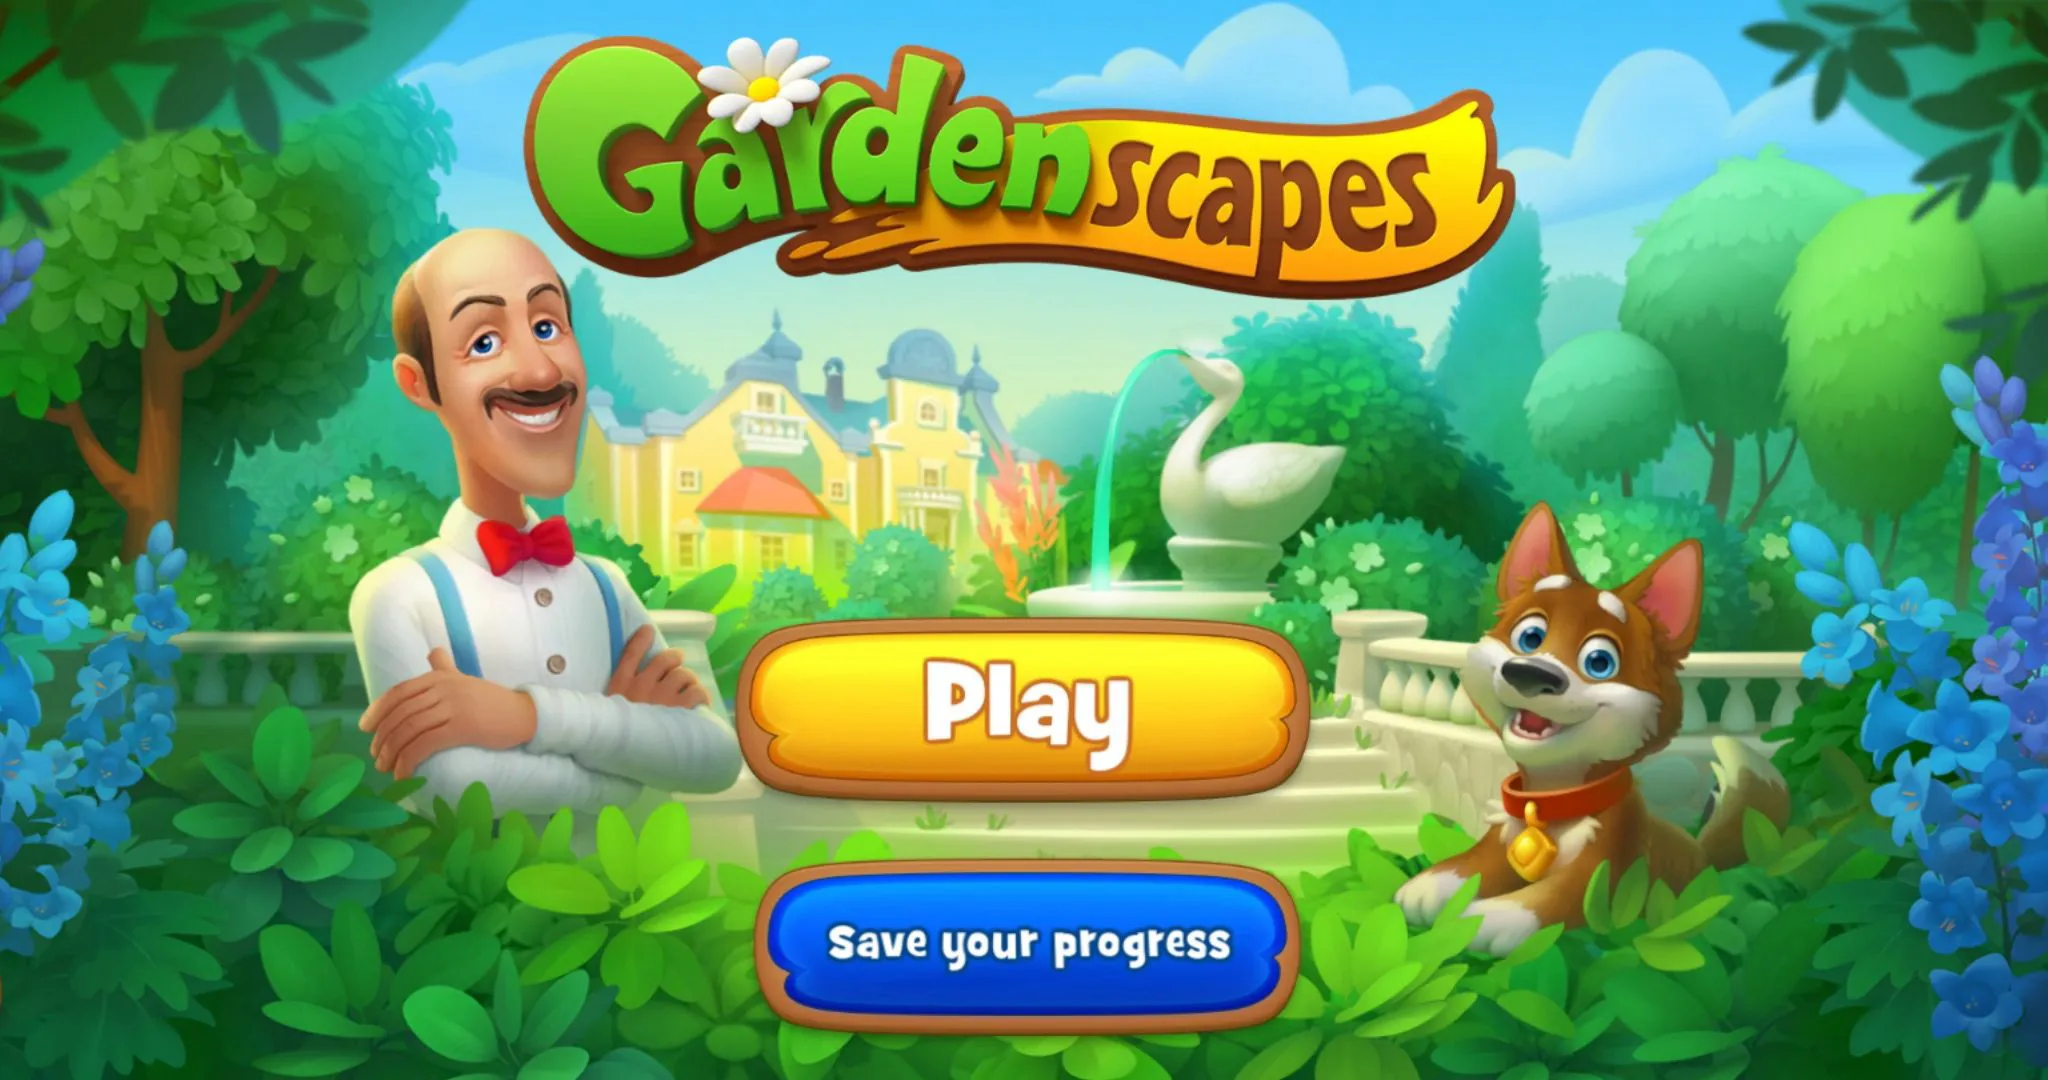 gardenscapes in-app purchases